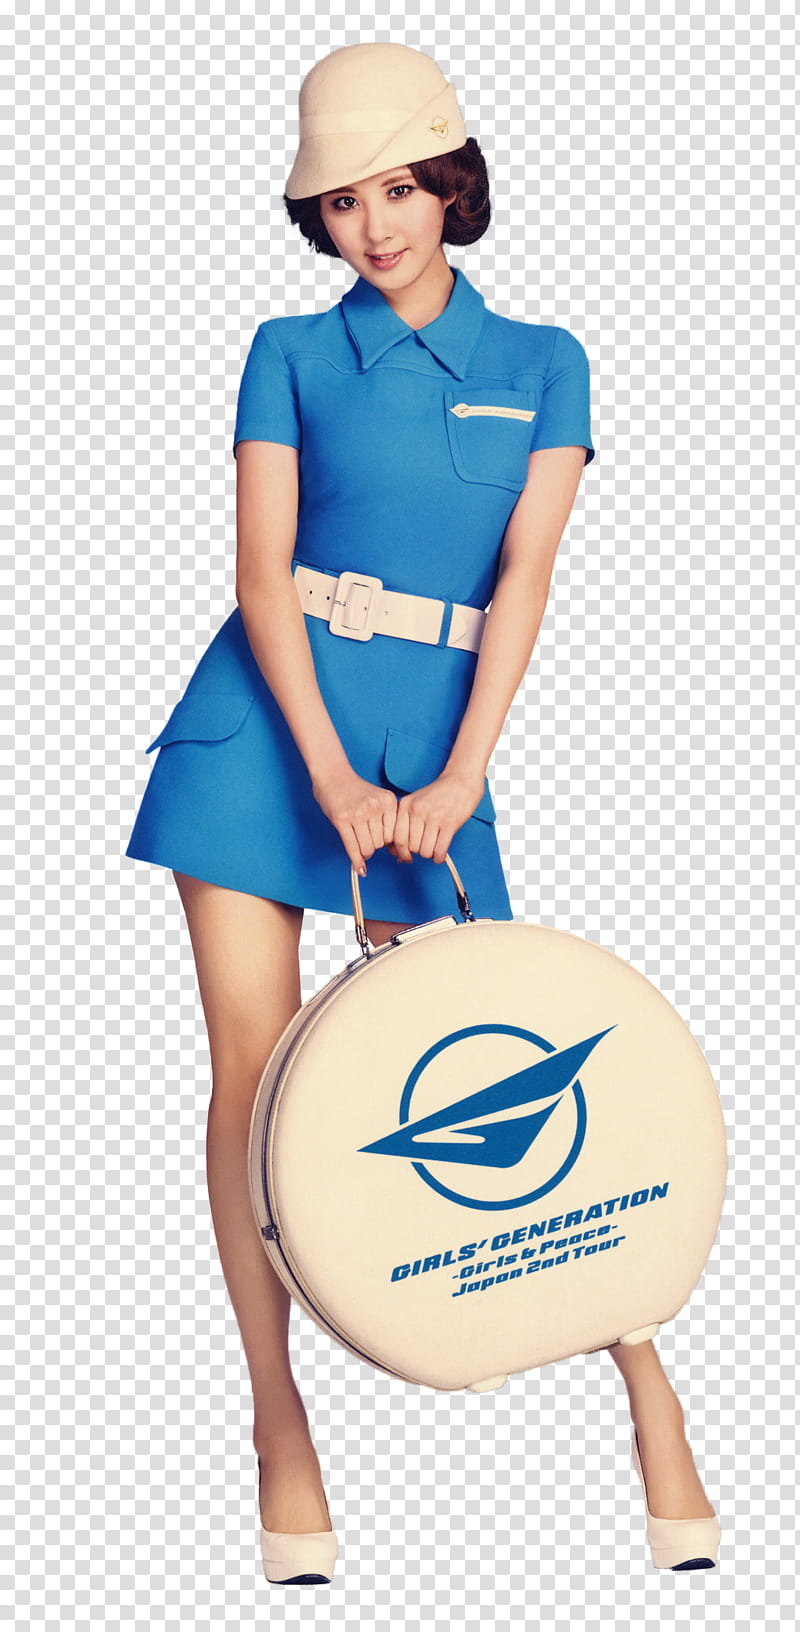 Girls Generation SNSD, woman carrying white and blue leather bag transparent background PNG clipart